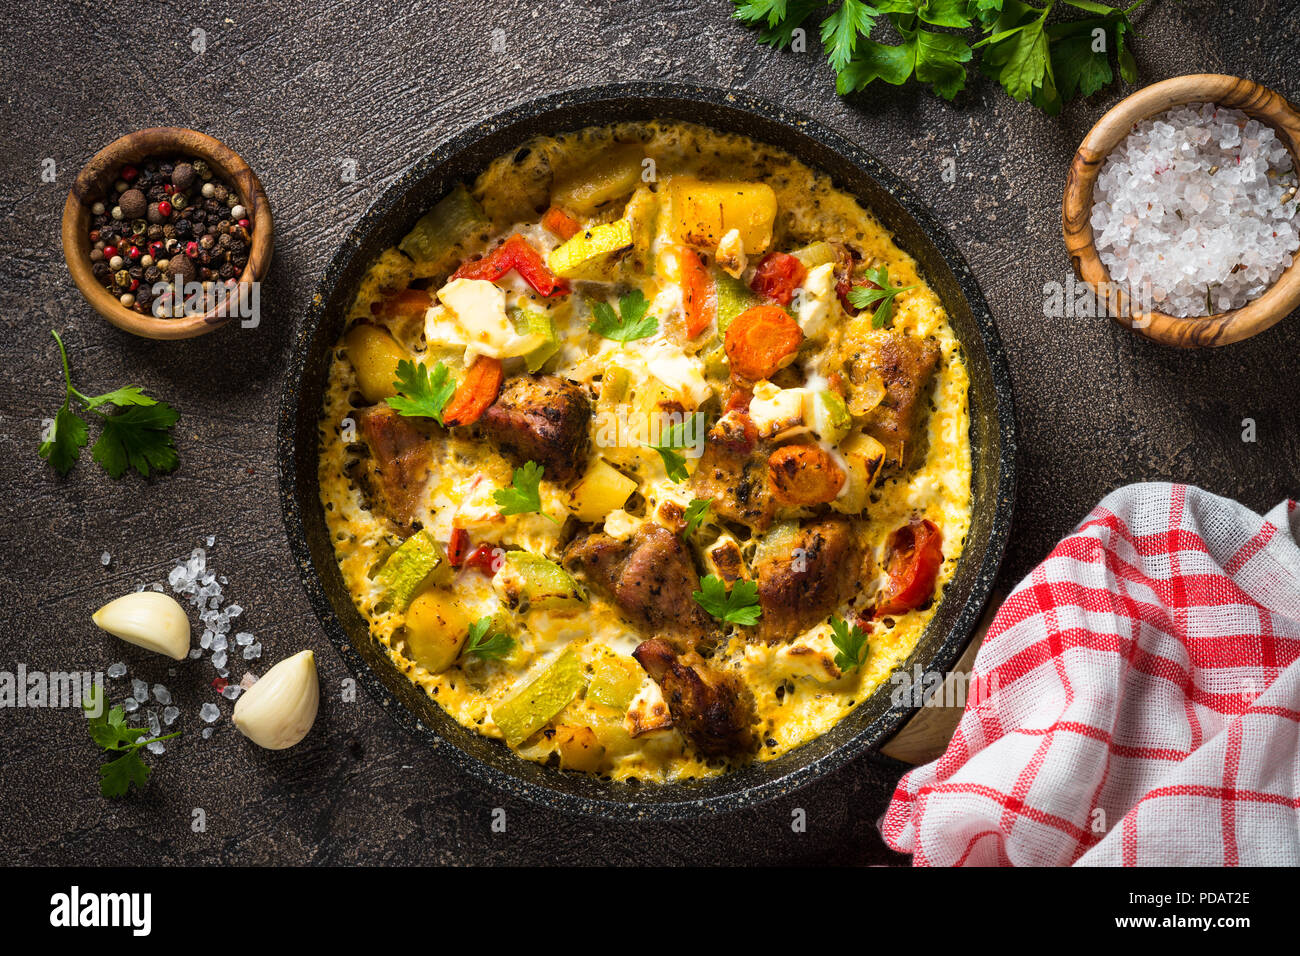 Frittata with meat and vegetables on dark background. Stock Photo